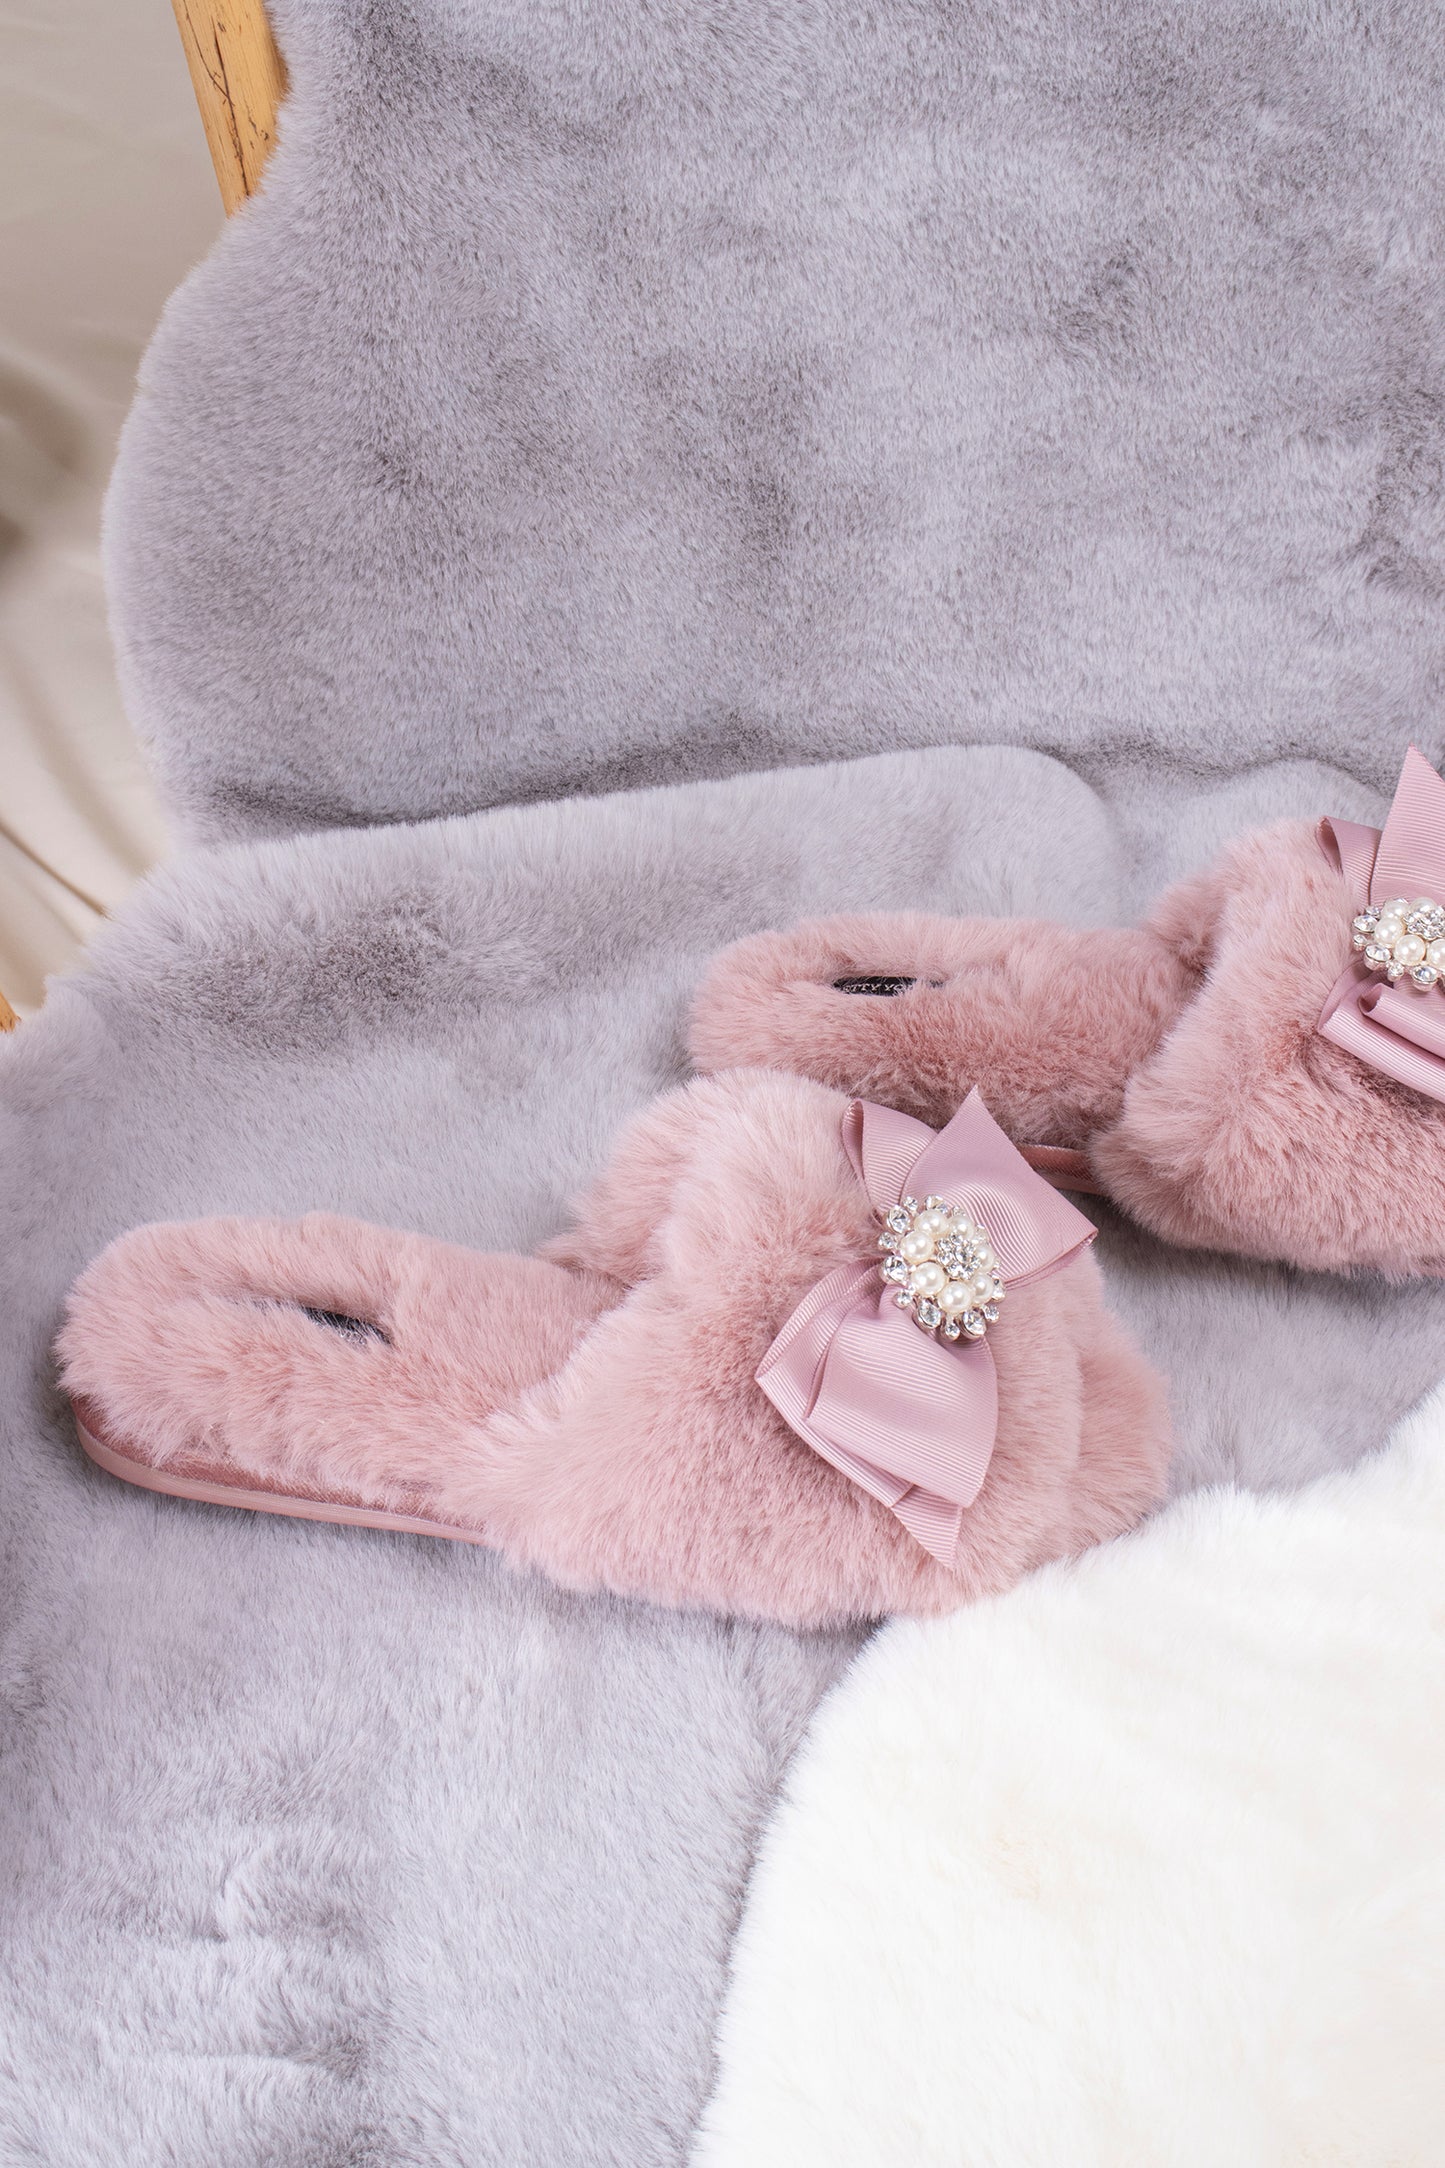 
                  
                    Anya women's slider slippers in pink using the softest faux furs and topped with a premium grosgrain bow finished with a jewel pearl embellishment from Pretty You London
                  
                